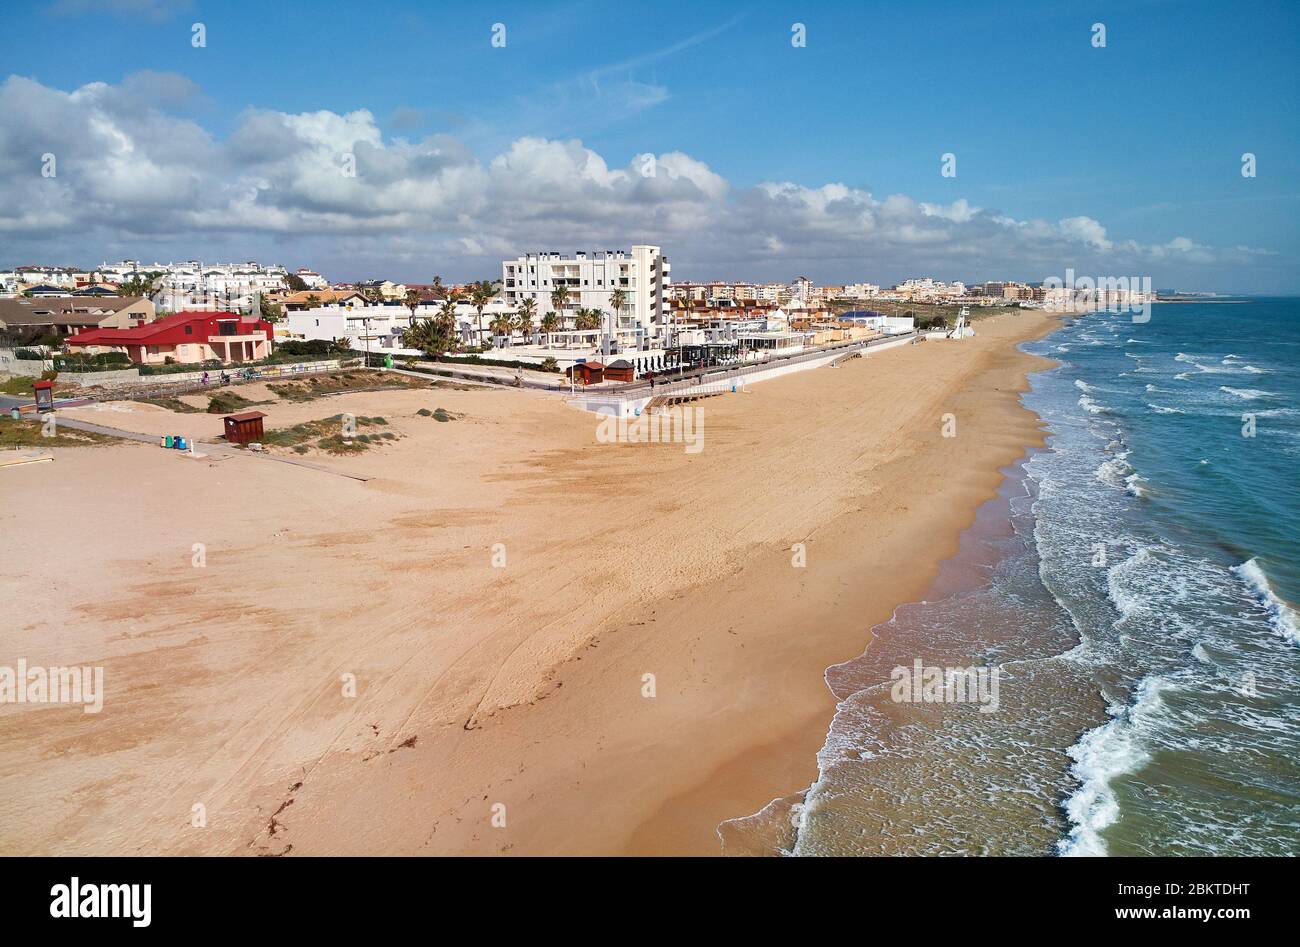 Aerial photography empty sandy coastline of Costa Blanca at sunny day. Mediterranean Sea surf water blue cloudy sky, picturesque scenery Stock Photo